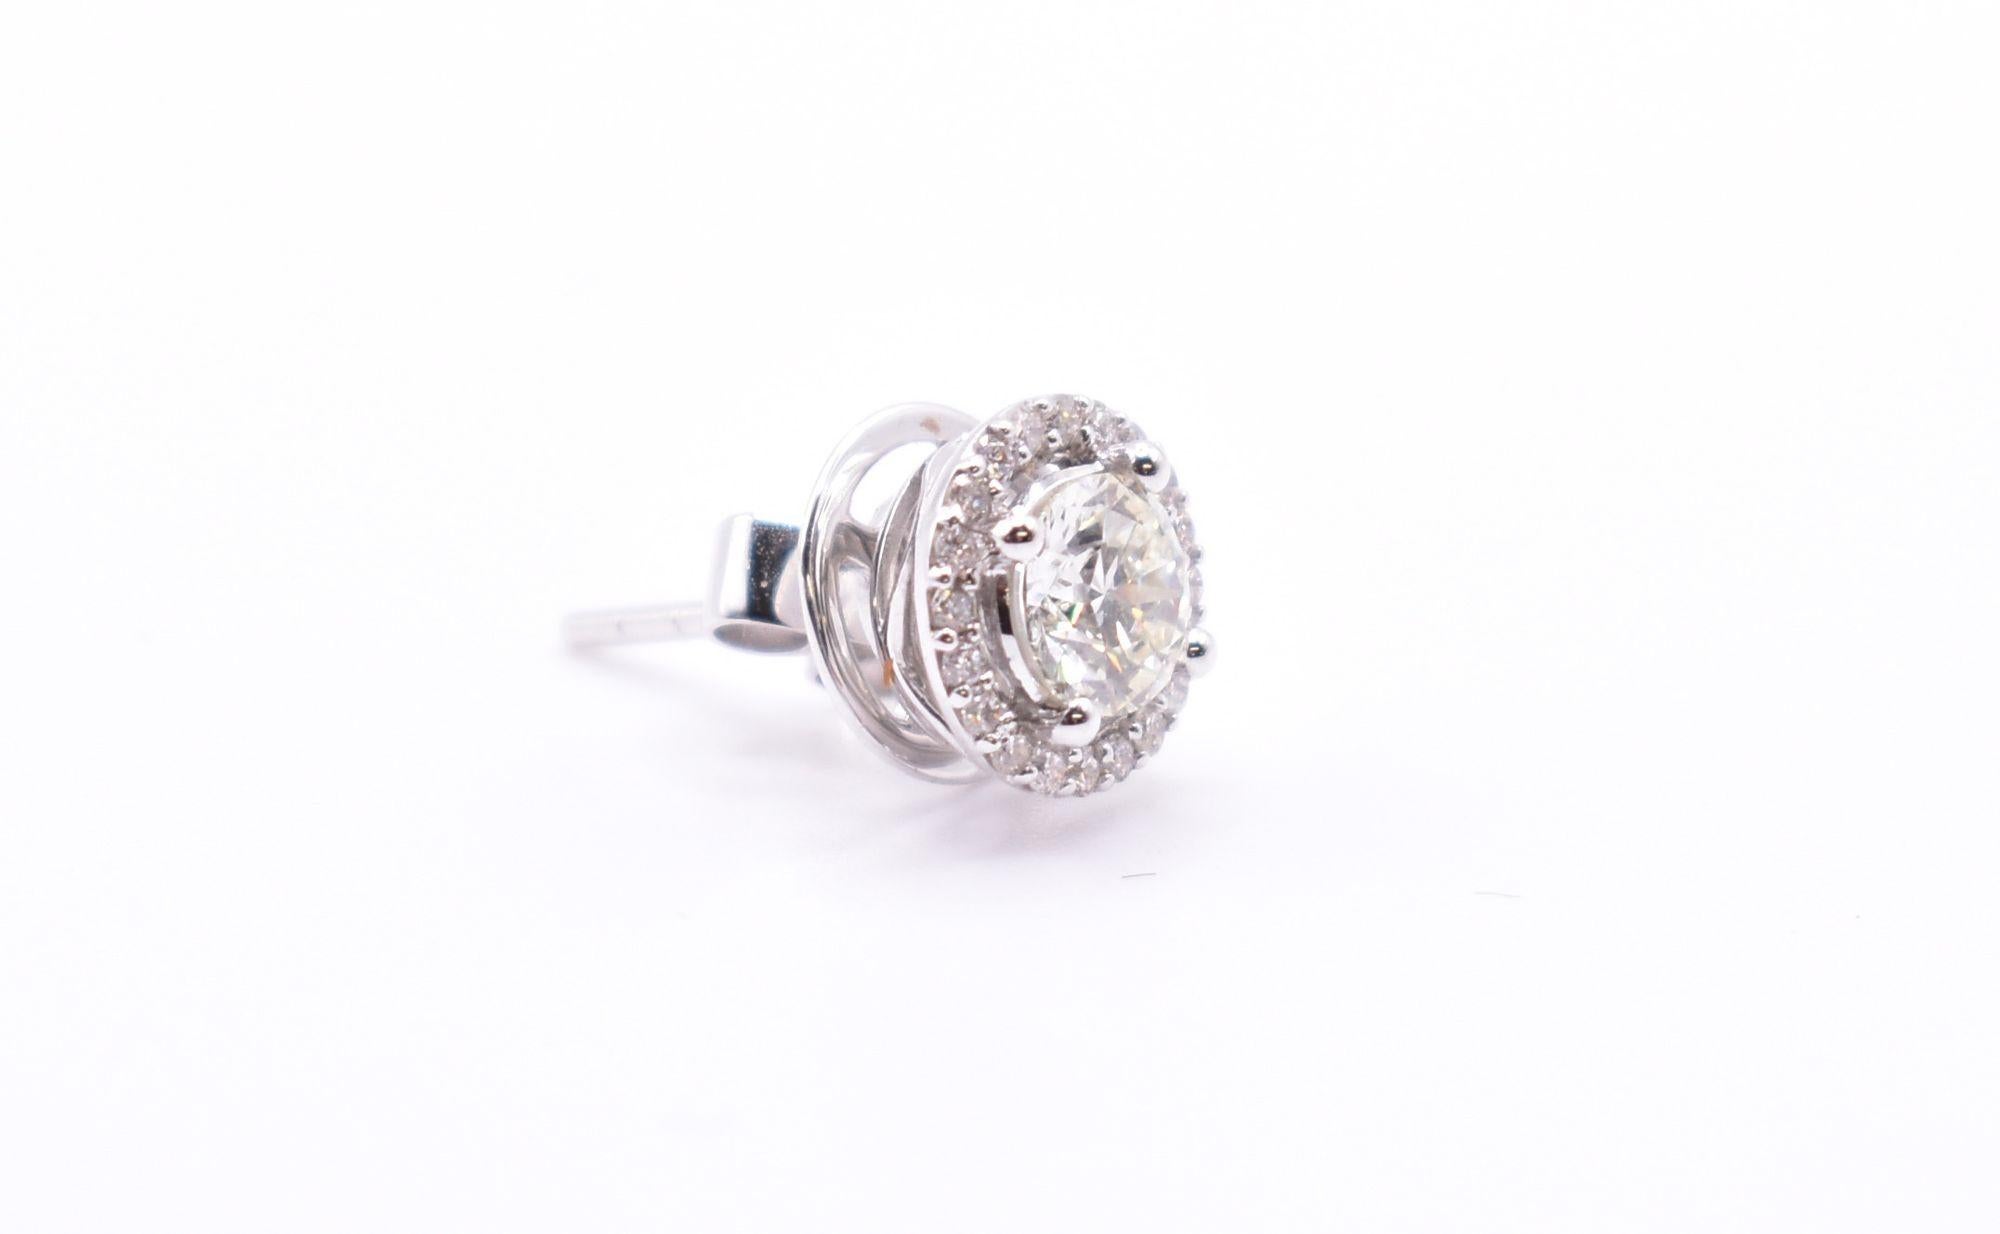 18k White Gold Diamond Halo Stud Earrings In Excellent Condition For Sale In Chelmsford, Essex